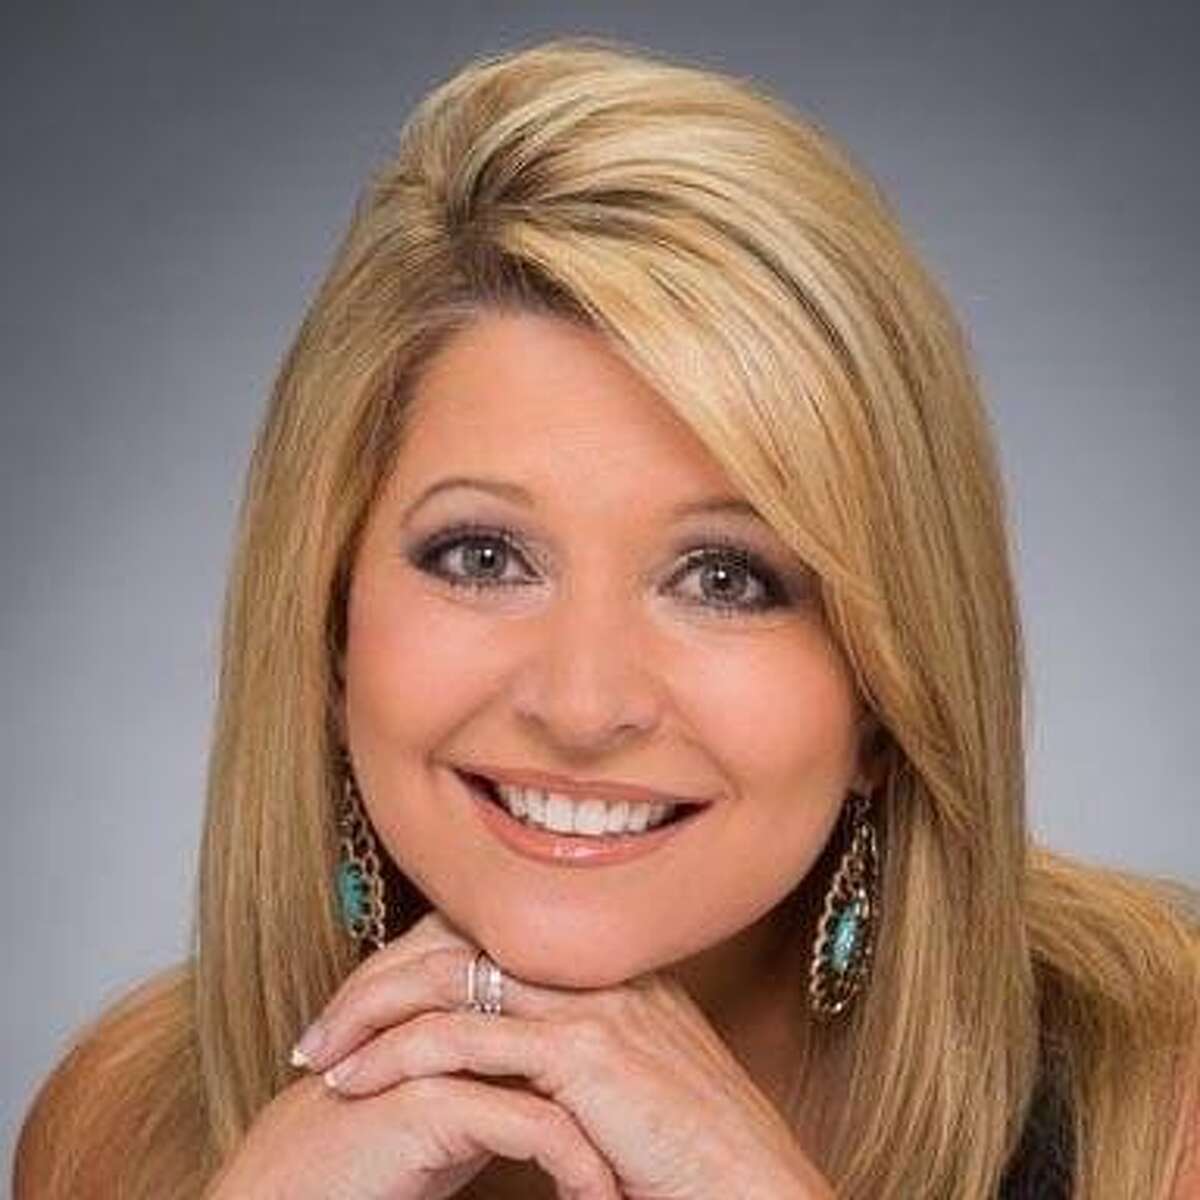 In full makeup, this is how viewers see Leslie Mouton on KSAT-TV. (KSAT photo)